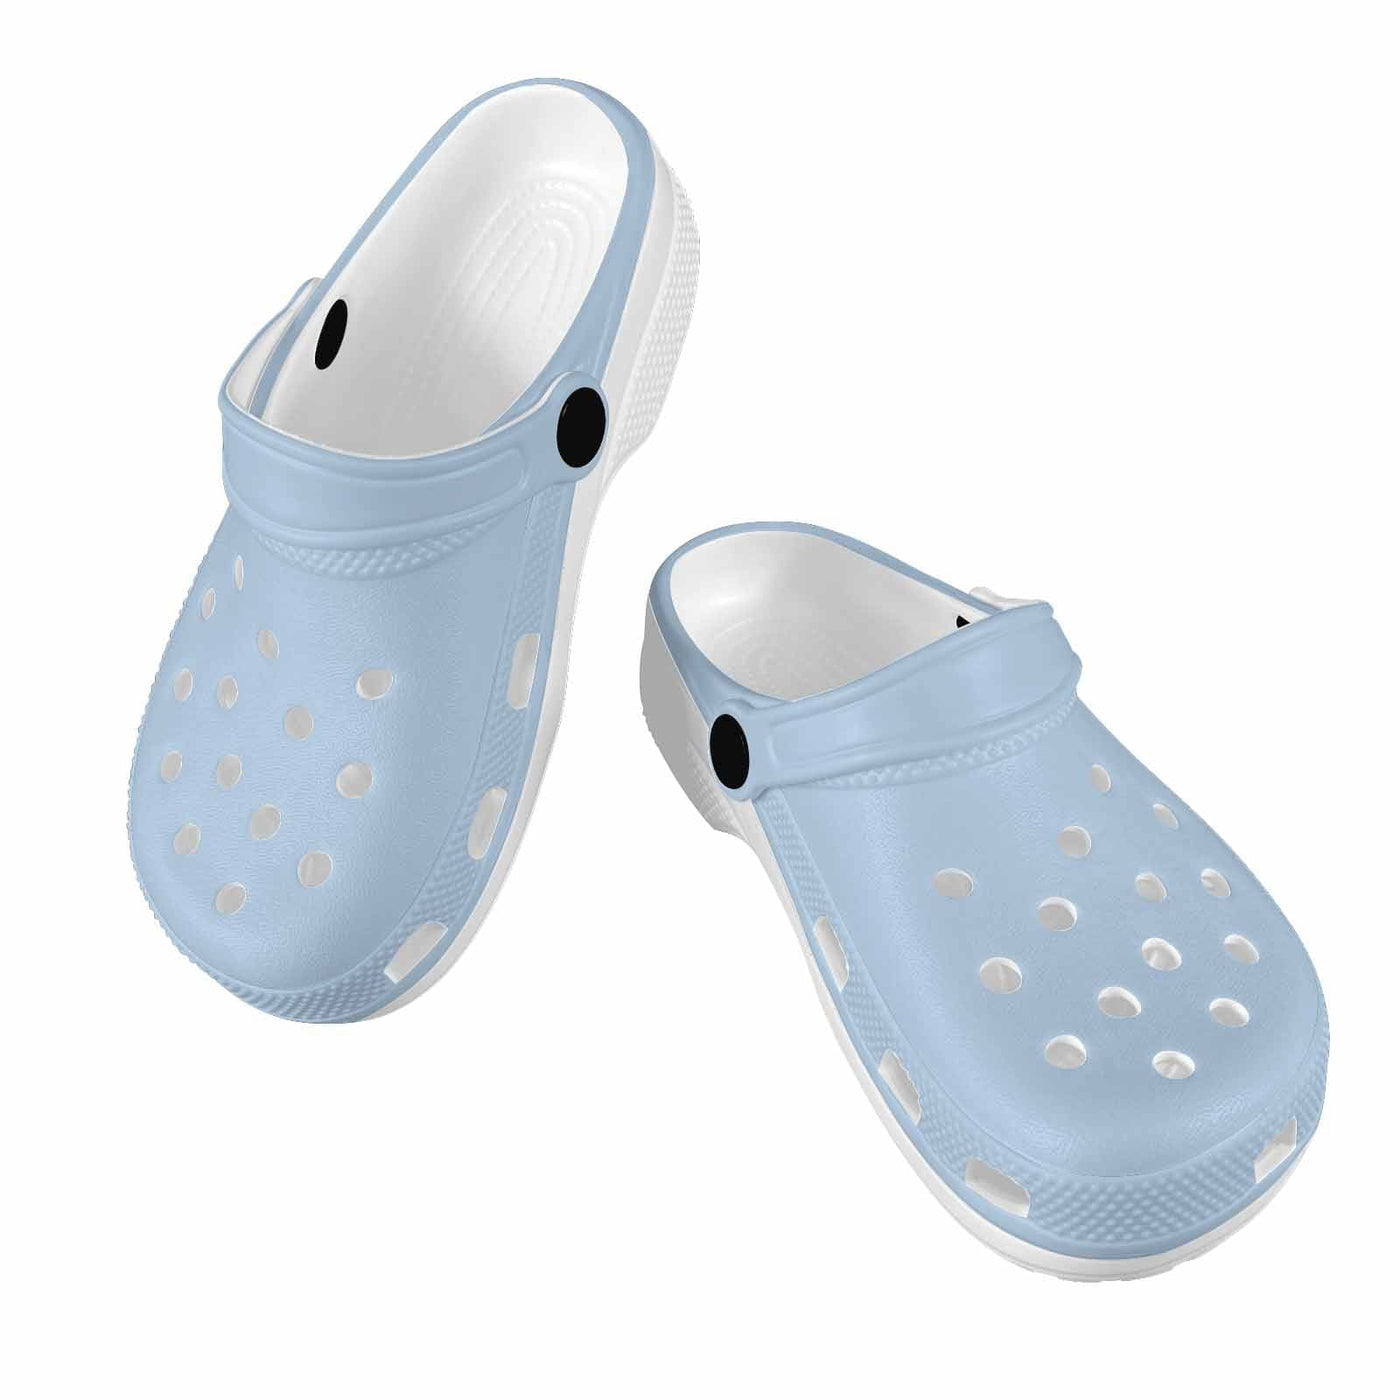 Serenity Blue Kids Clogs - Unisex | Clogs | Youth